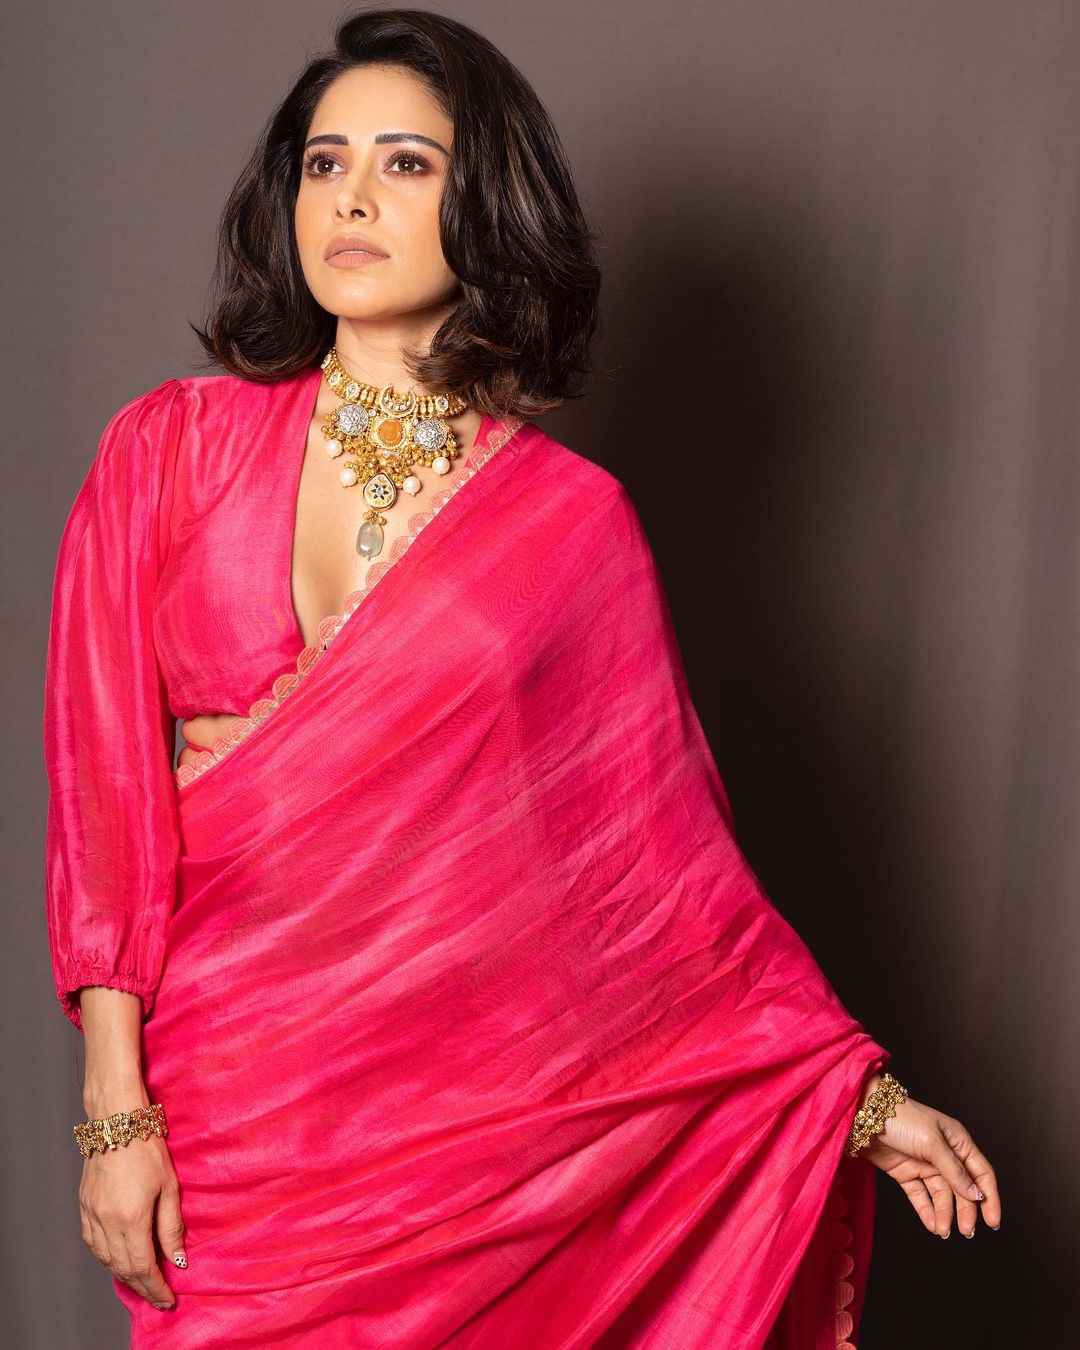 Nushrratt Bharuccha Looks Ethereal In A Pink Saree With Heavy Jewelry |  IWMBuzz